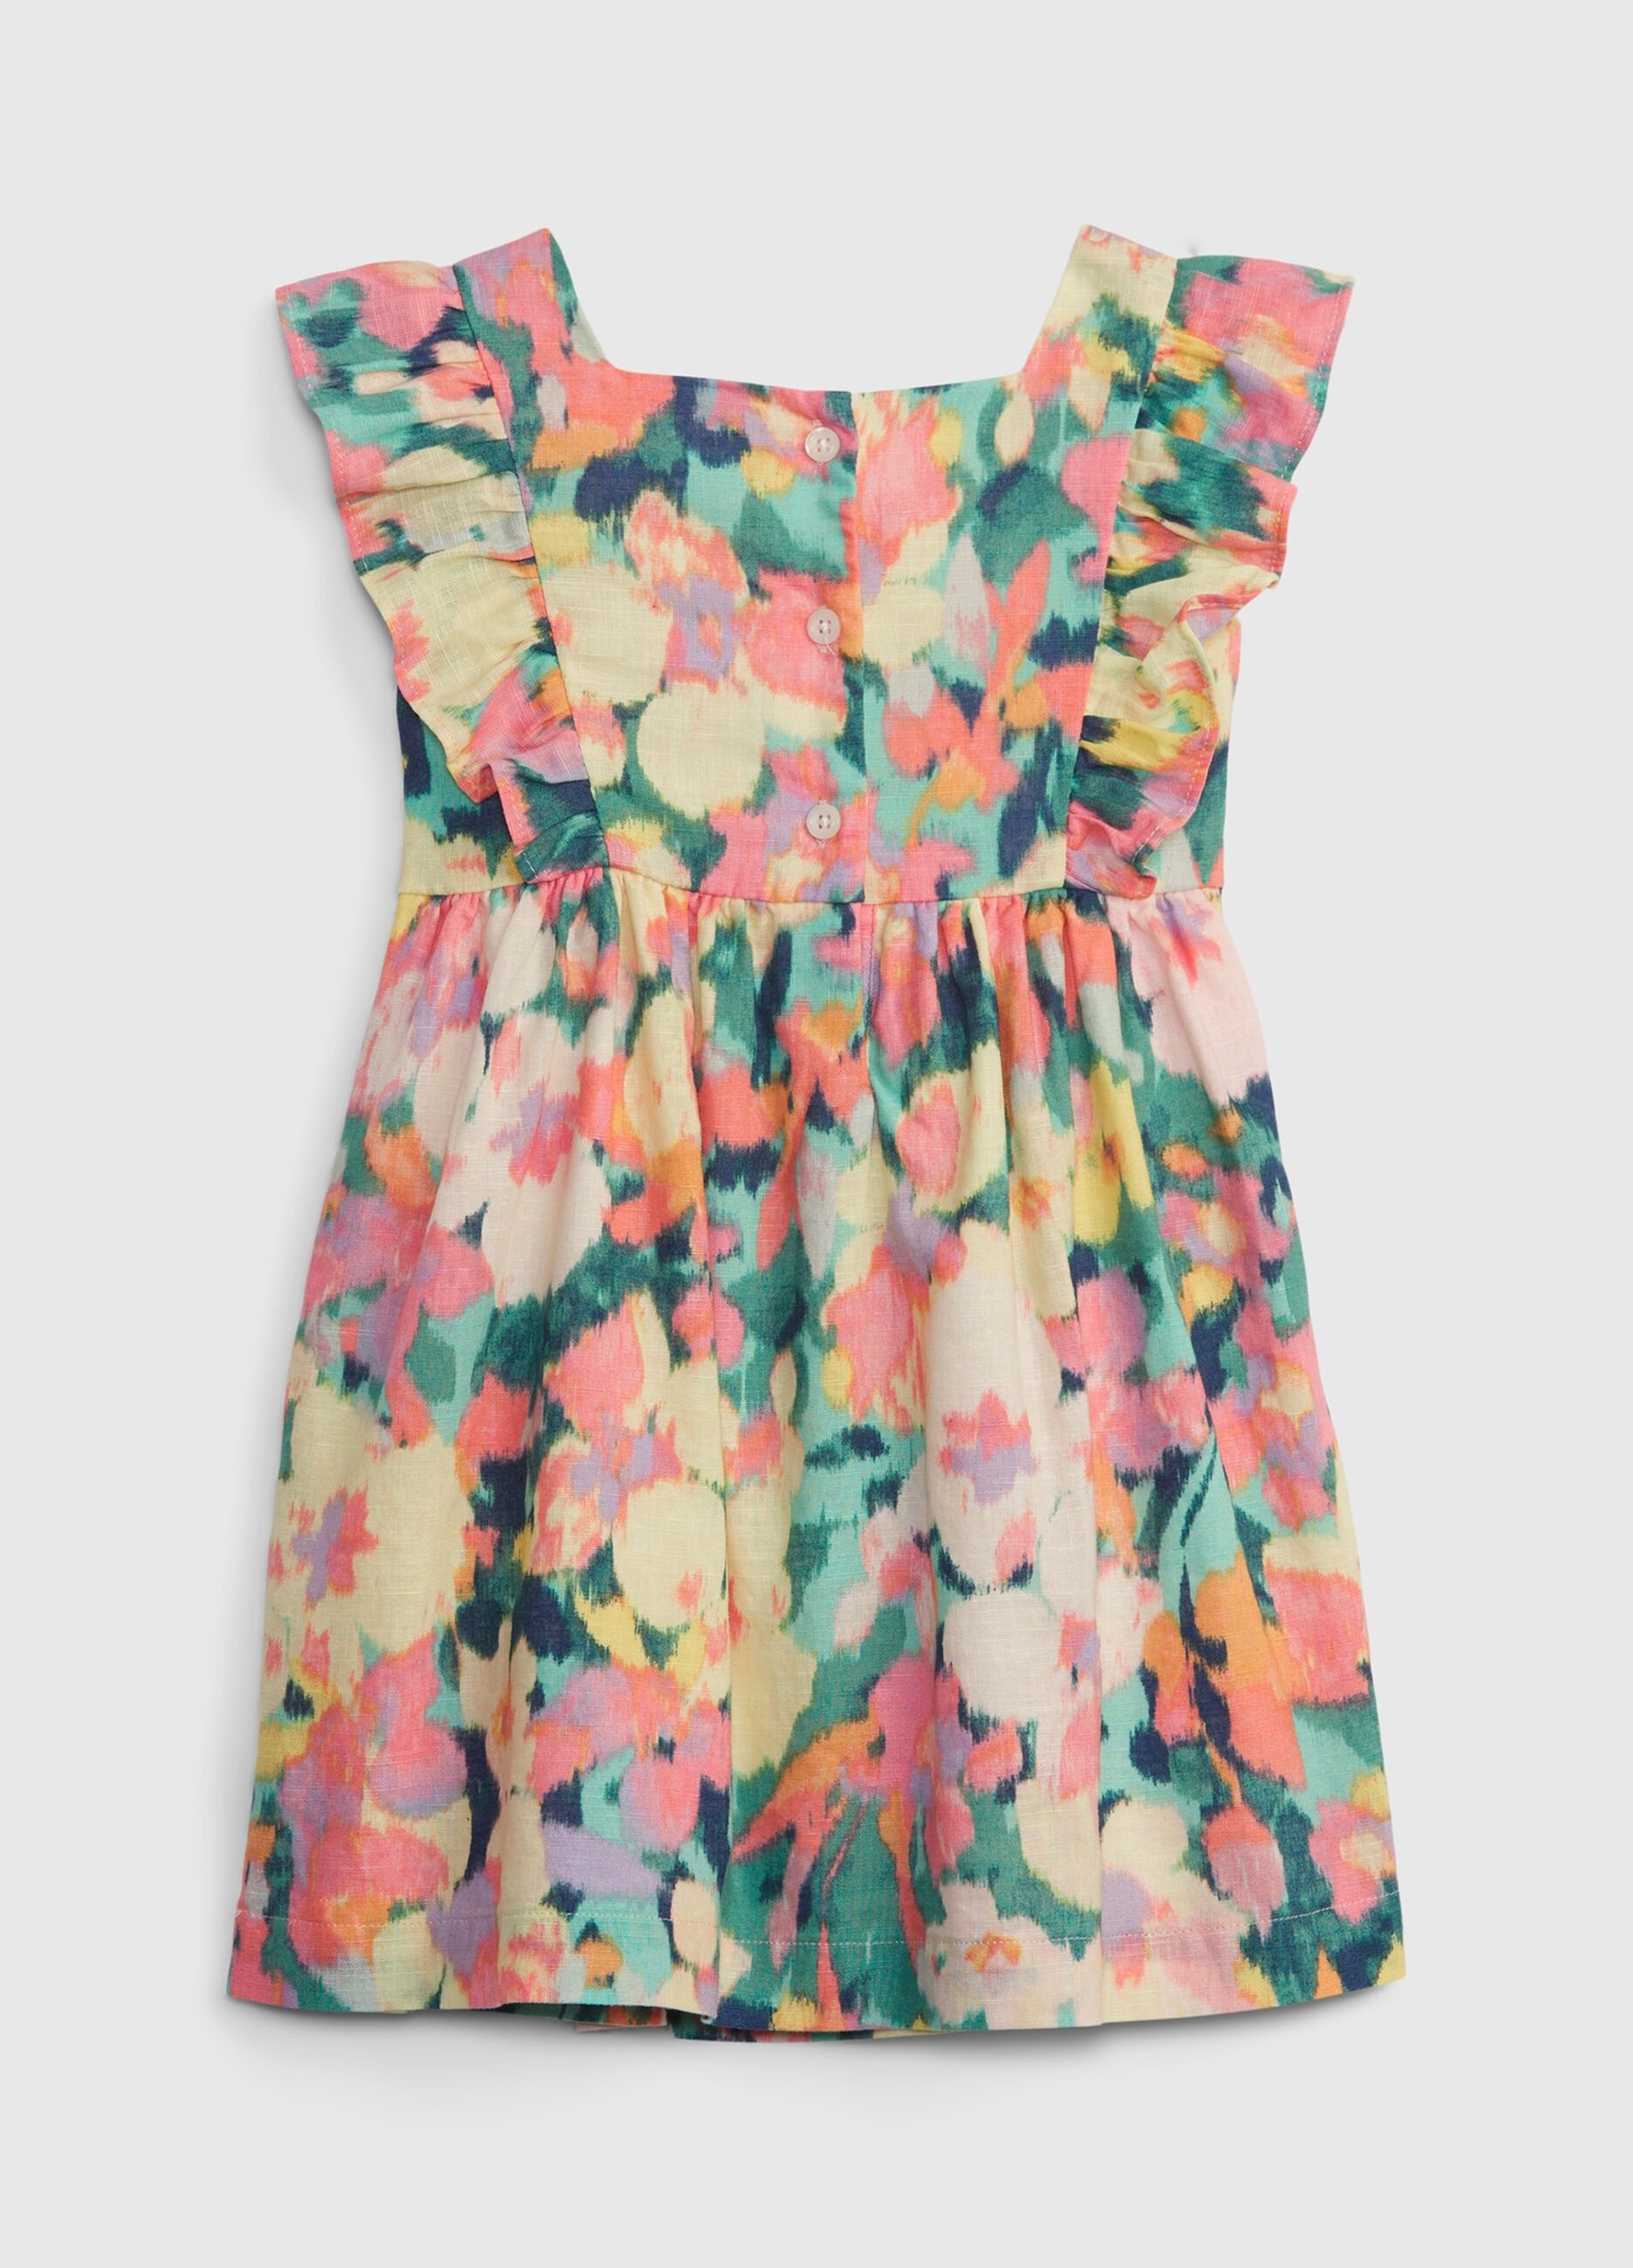 Floral dress in linen and cotton